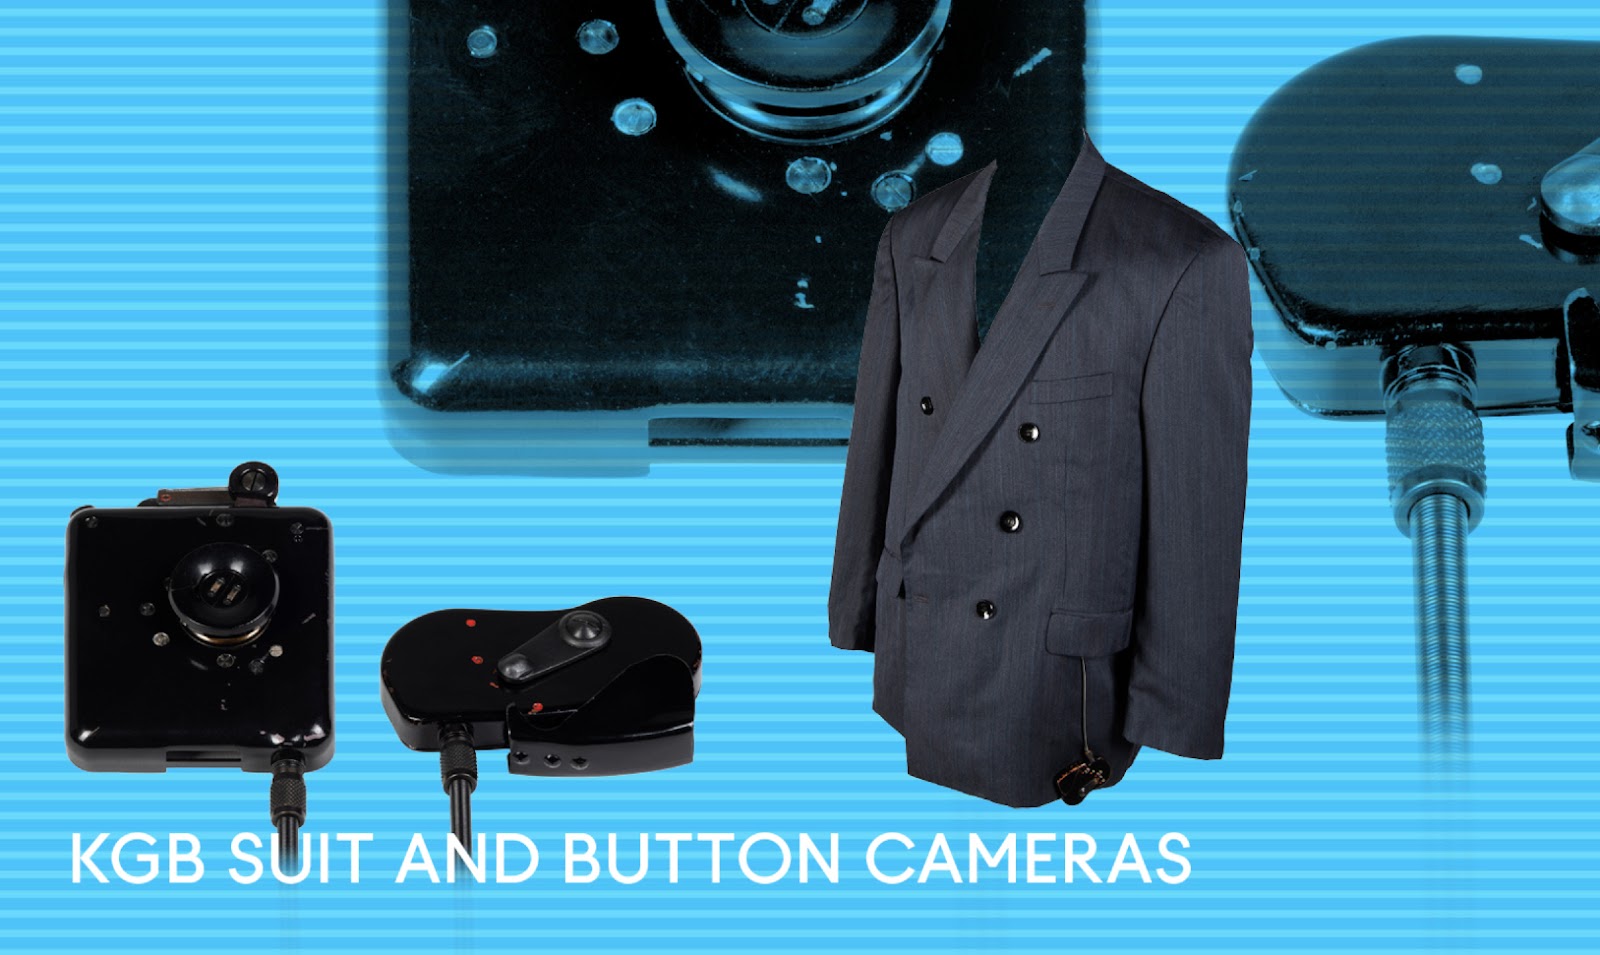 KGB Suit with a button camera